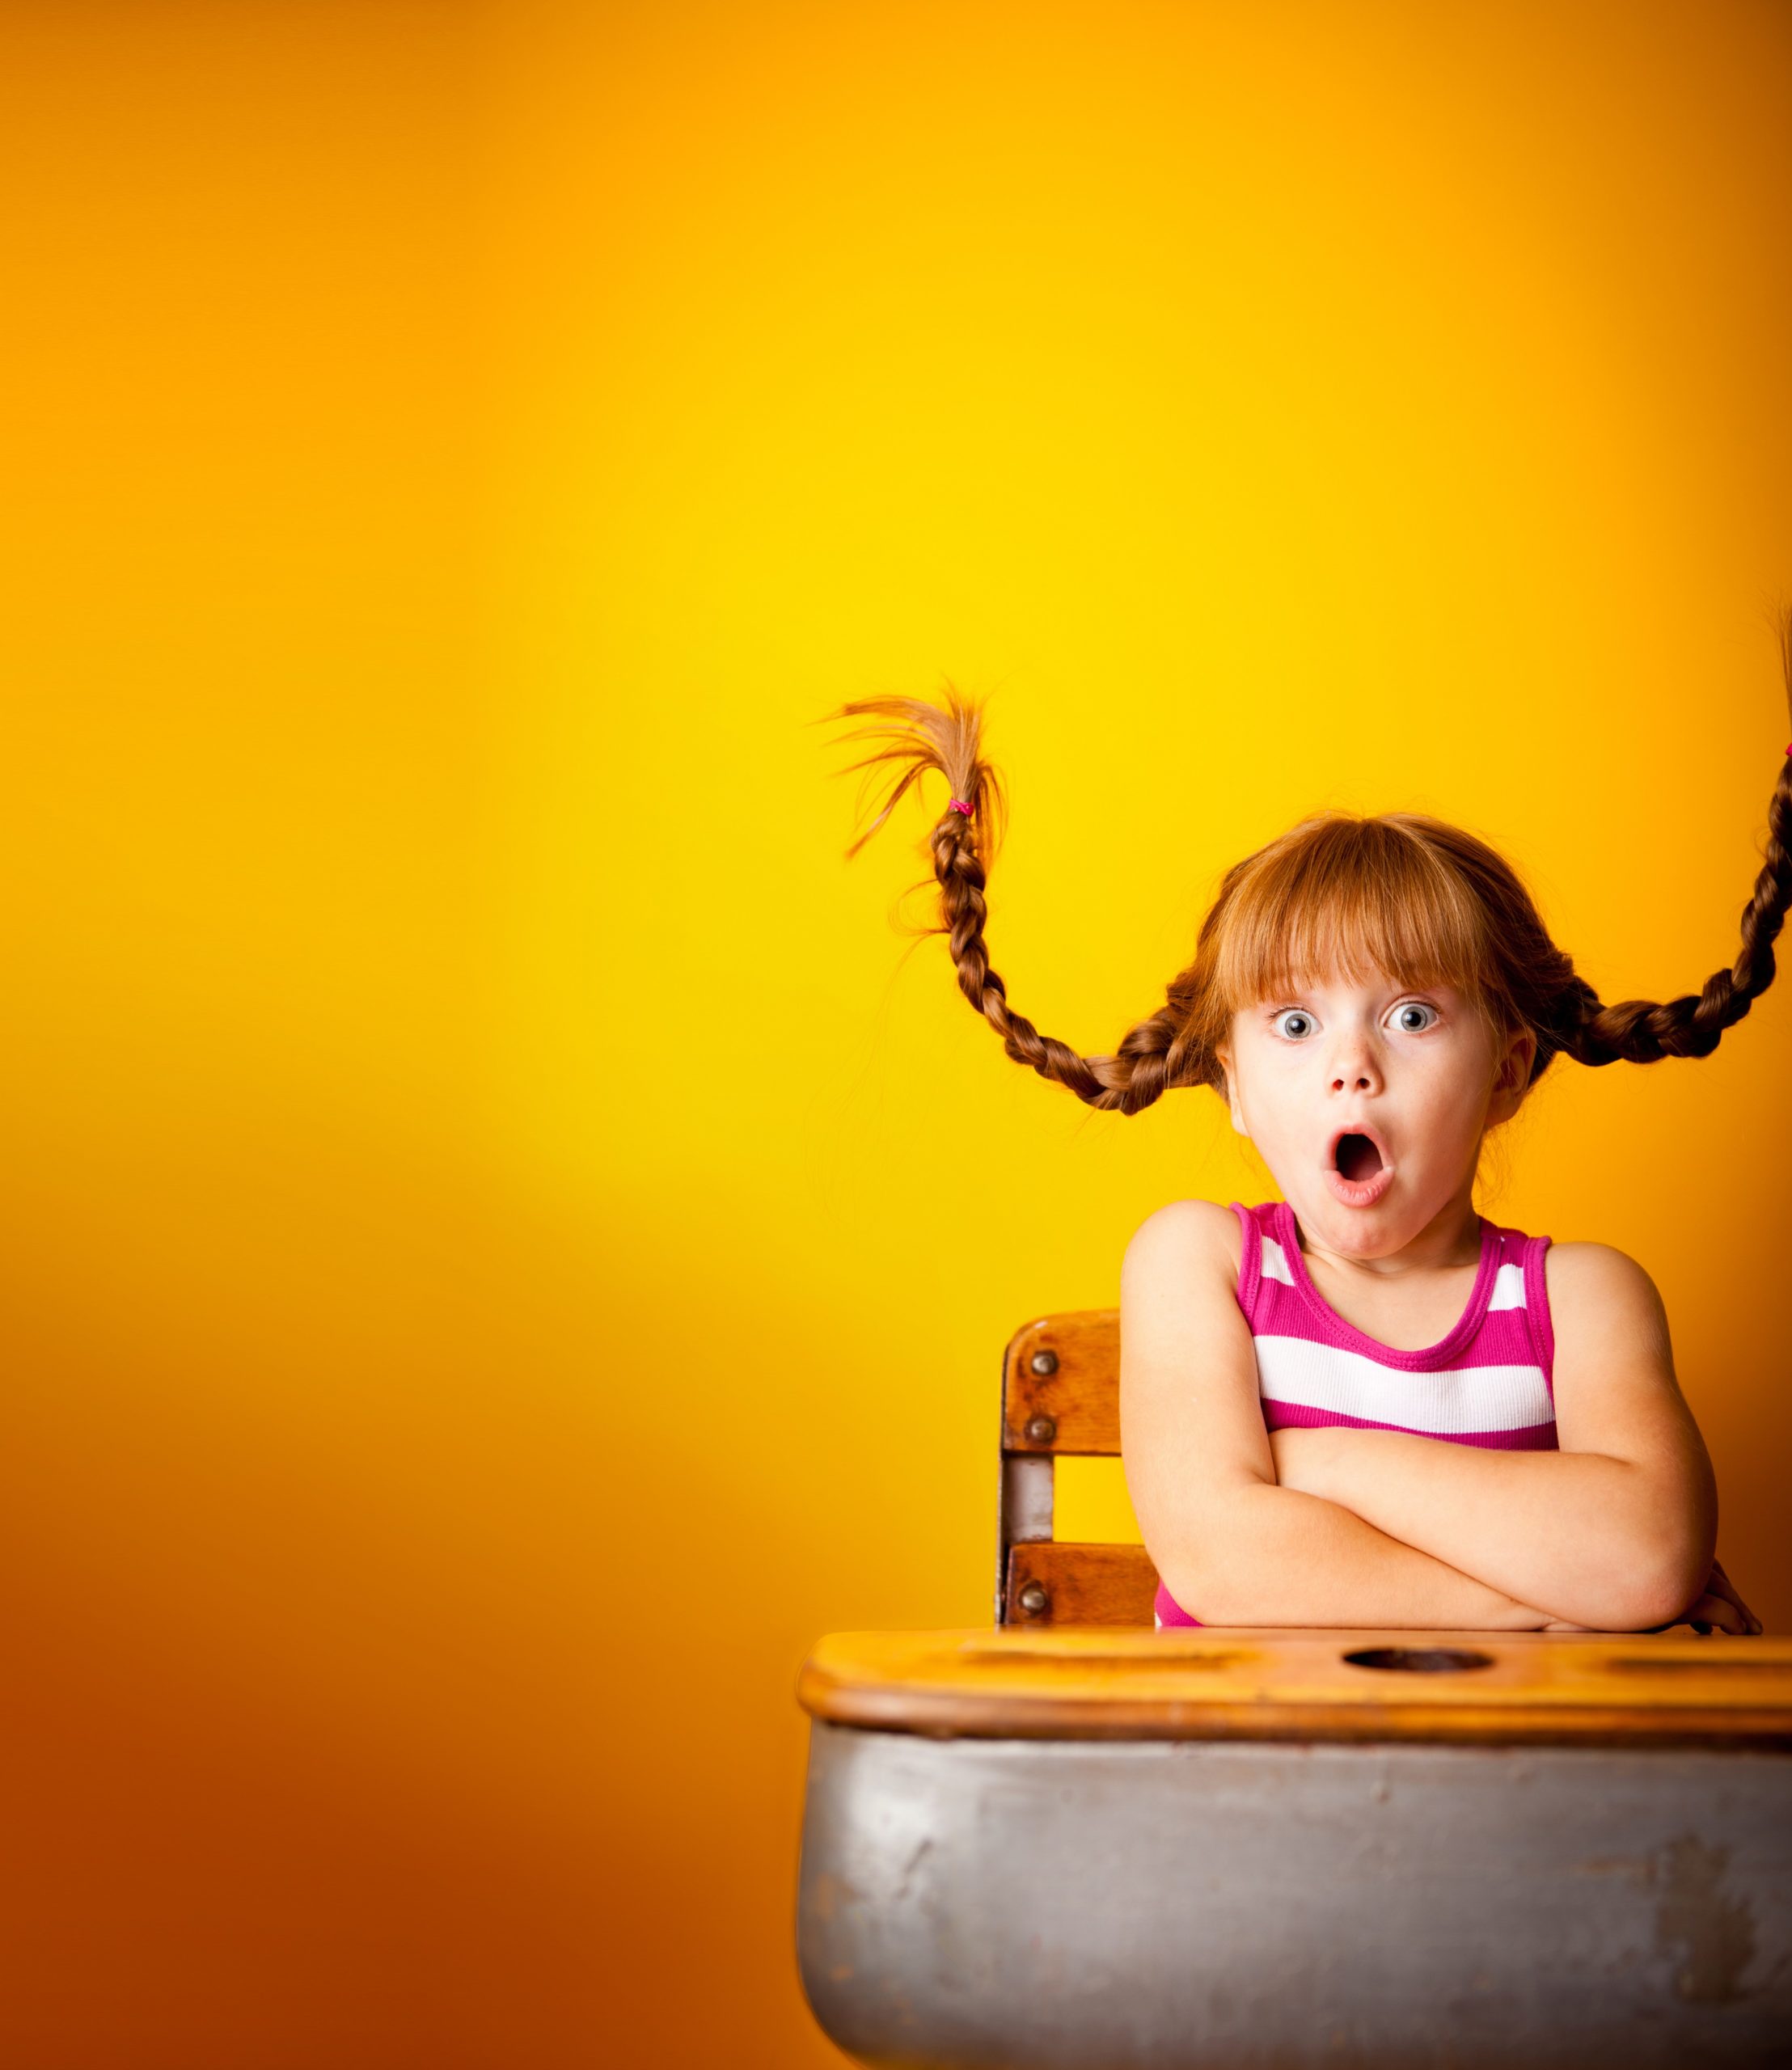 Young girl at desk with wild pigtails